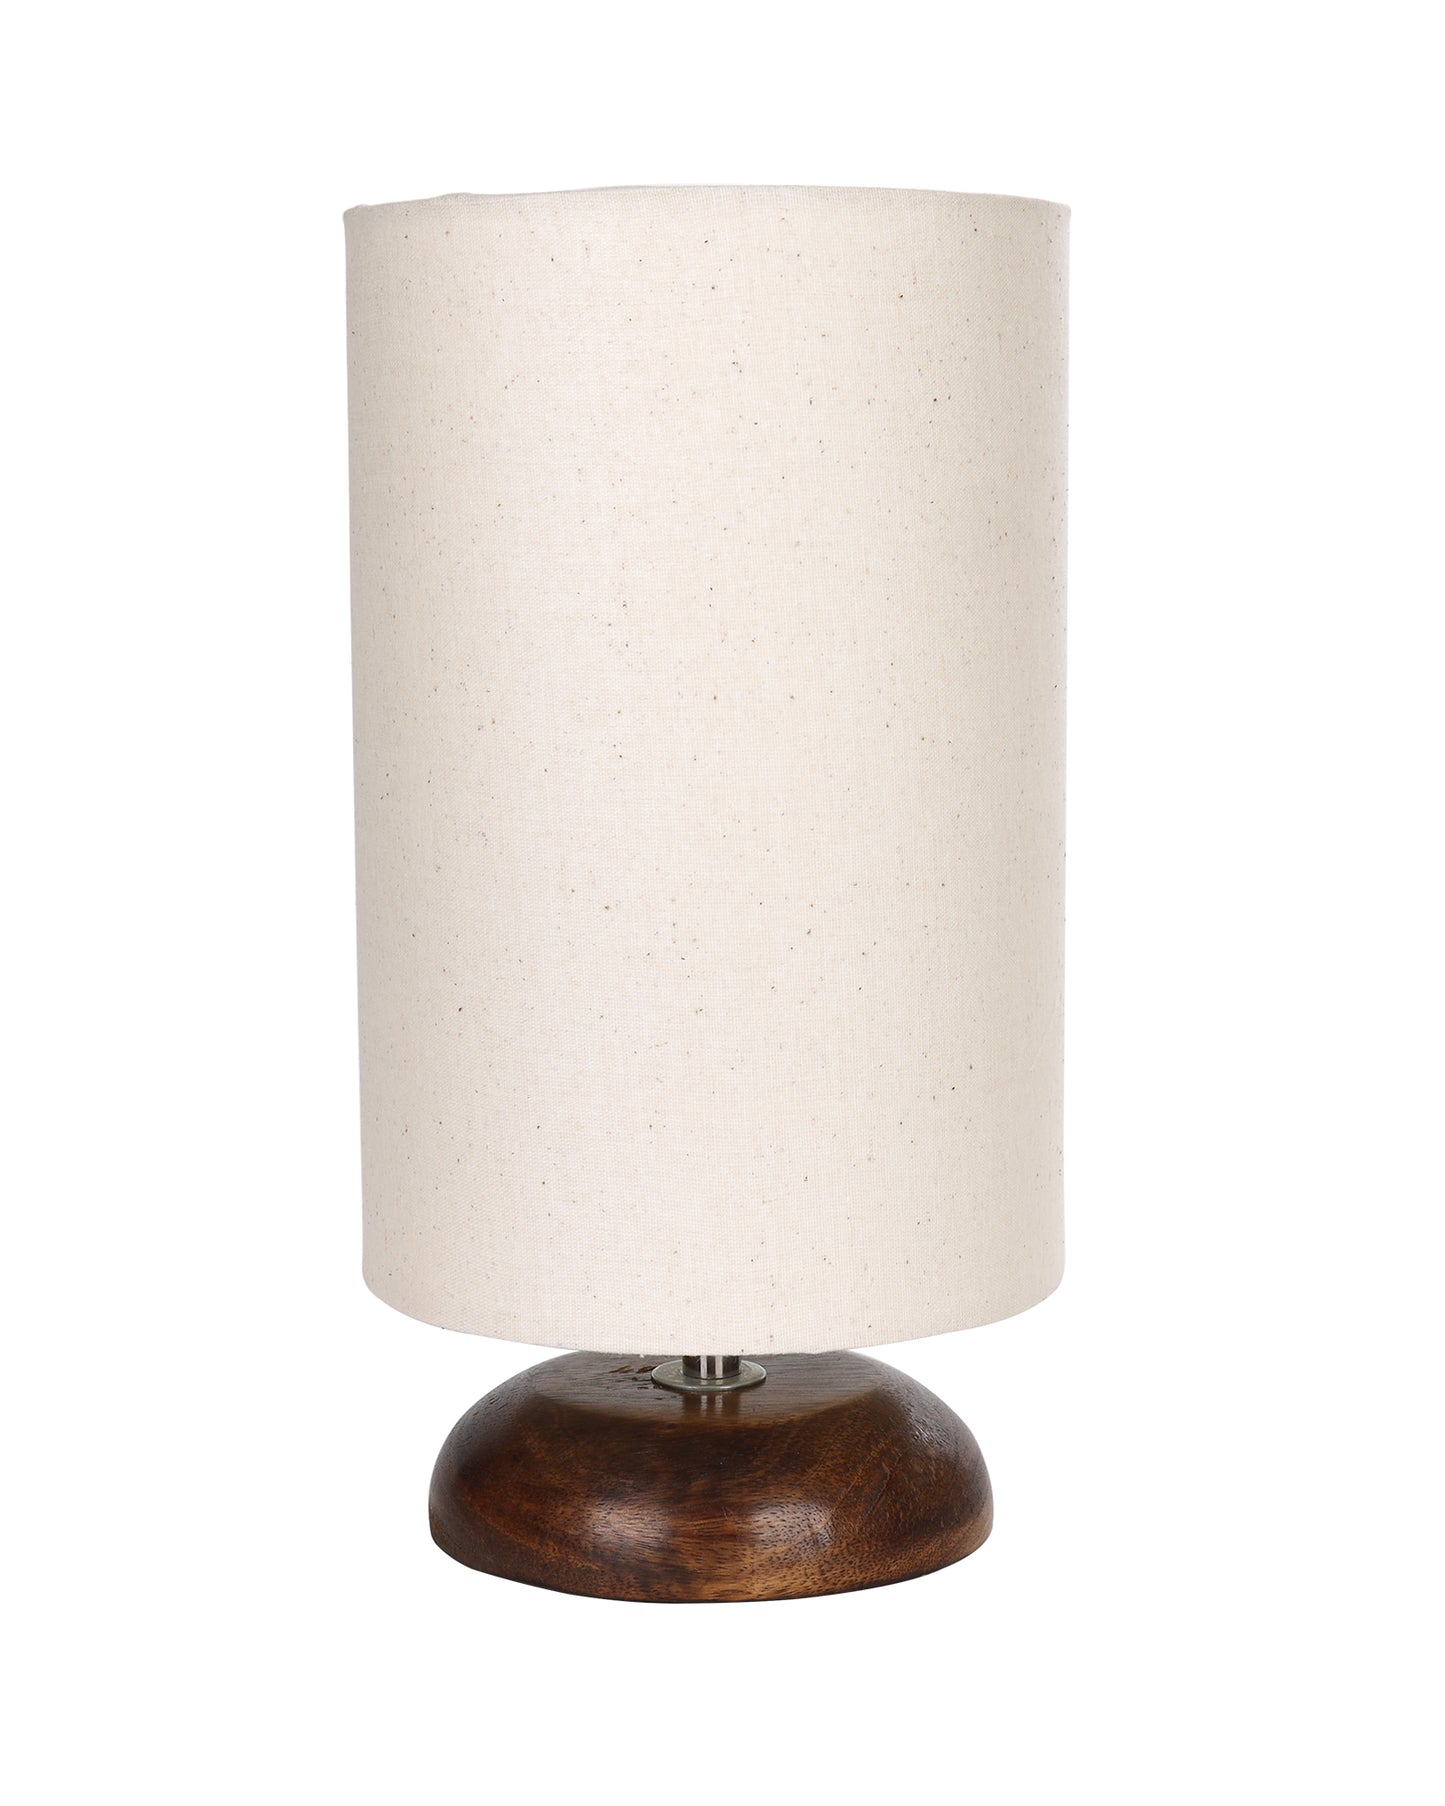 Modern Antique E27 Base Pebble Zen Wooden Table Lamp With Lampshade Nightstand Lamp